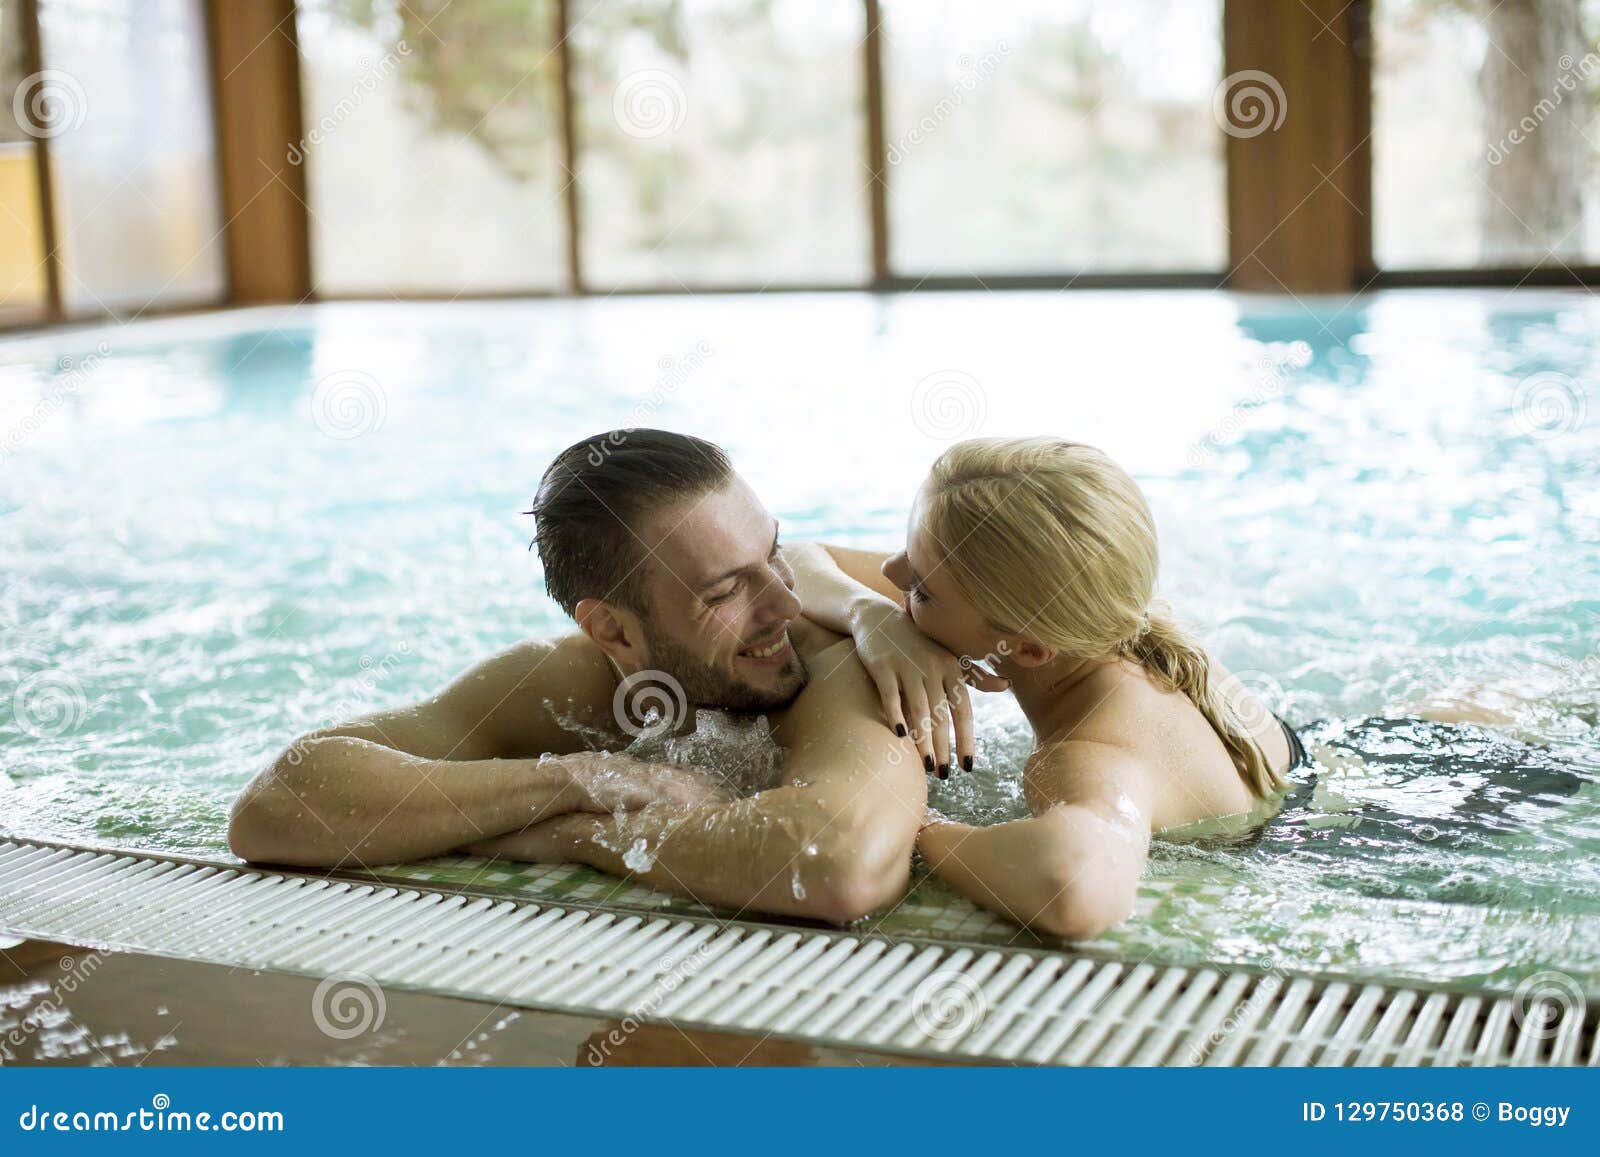 Loving Couple Relaxing In Hot Tub Stock Photo Image Of Person